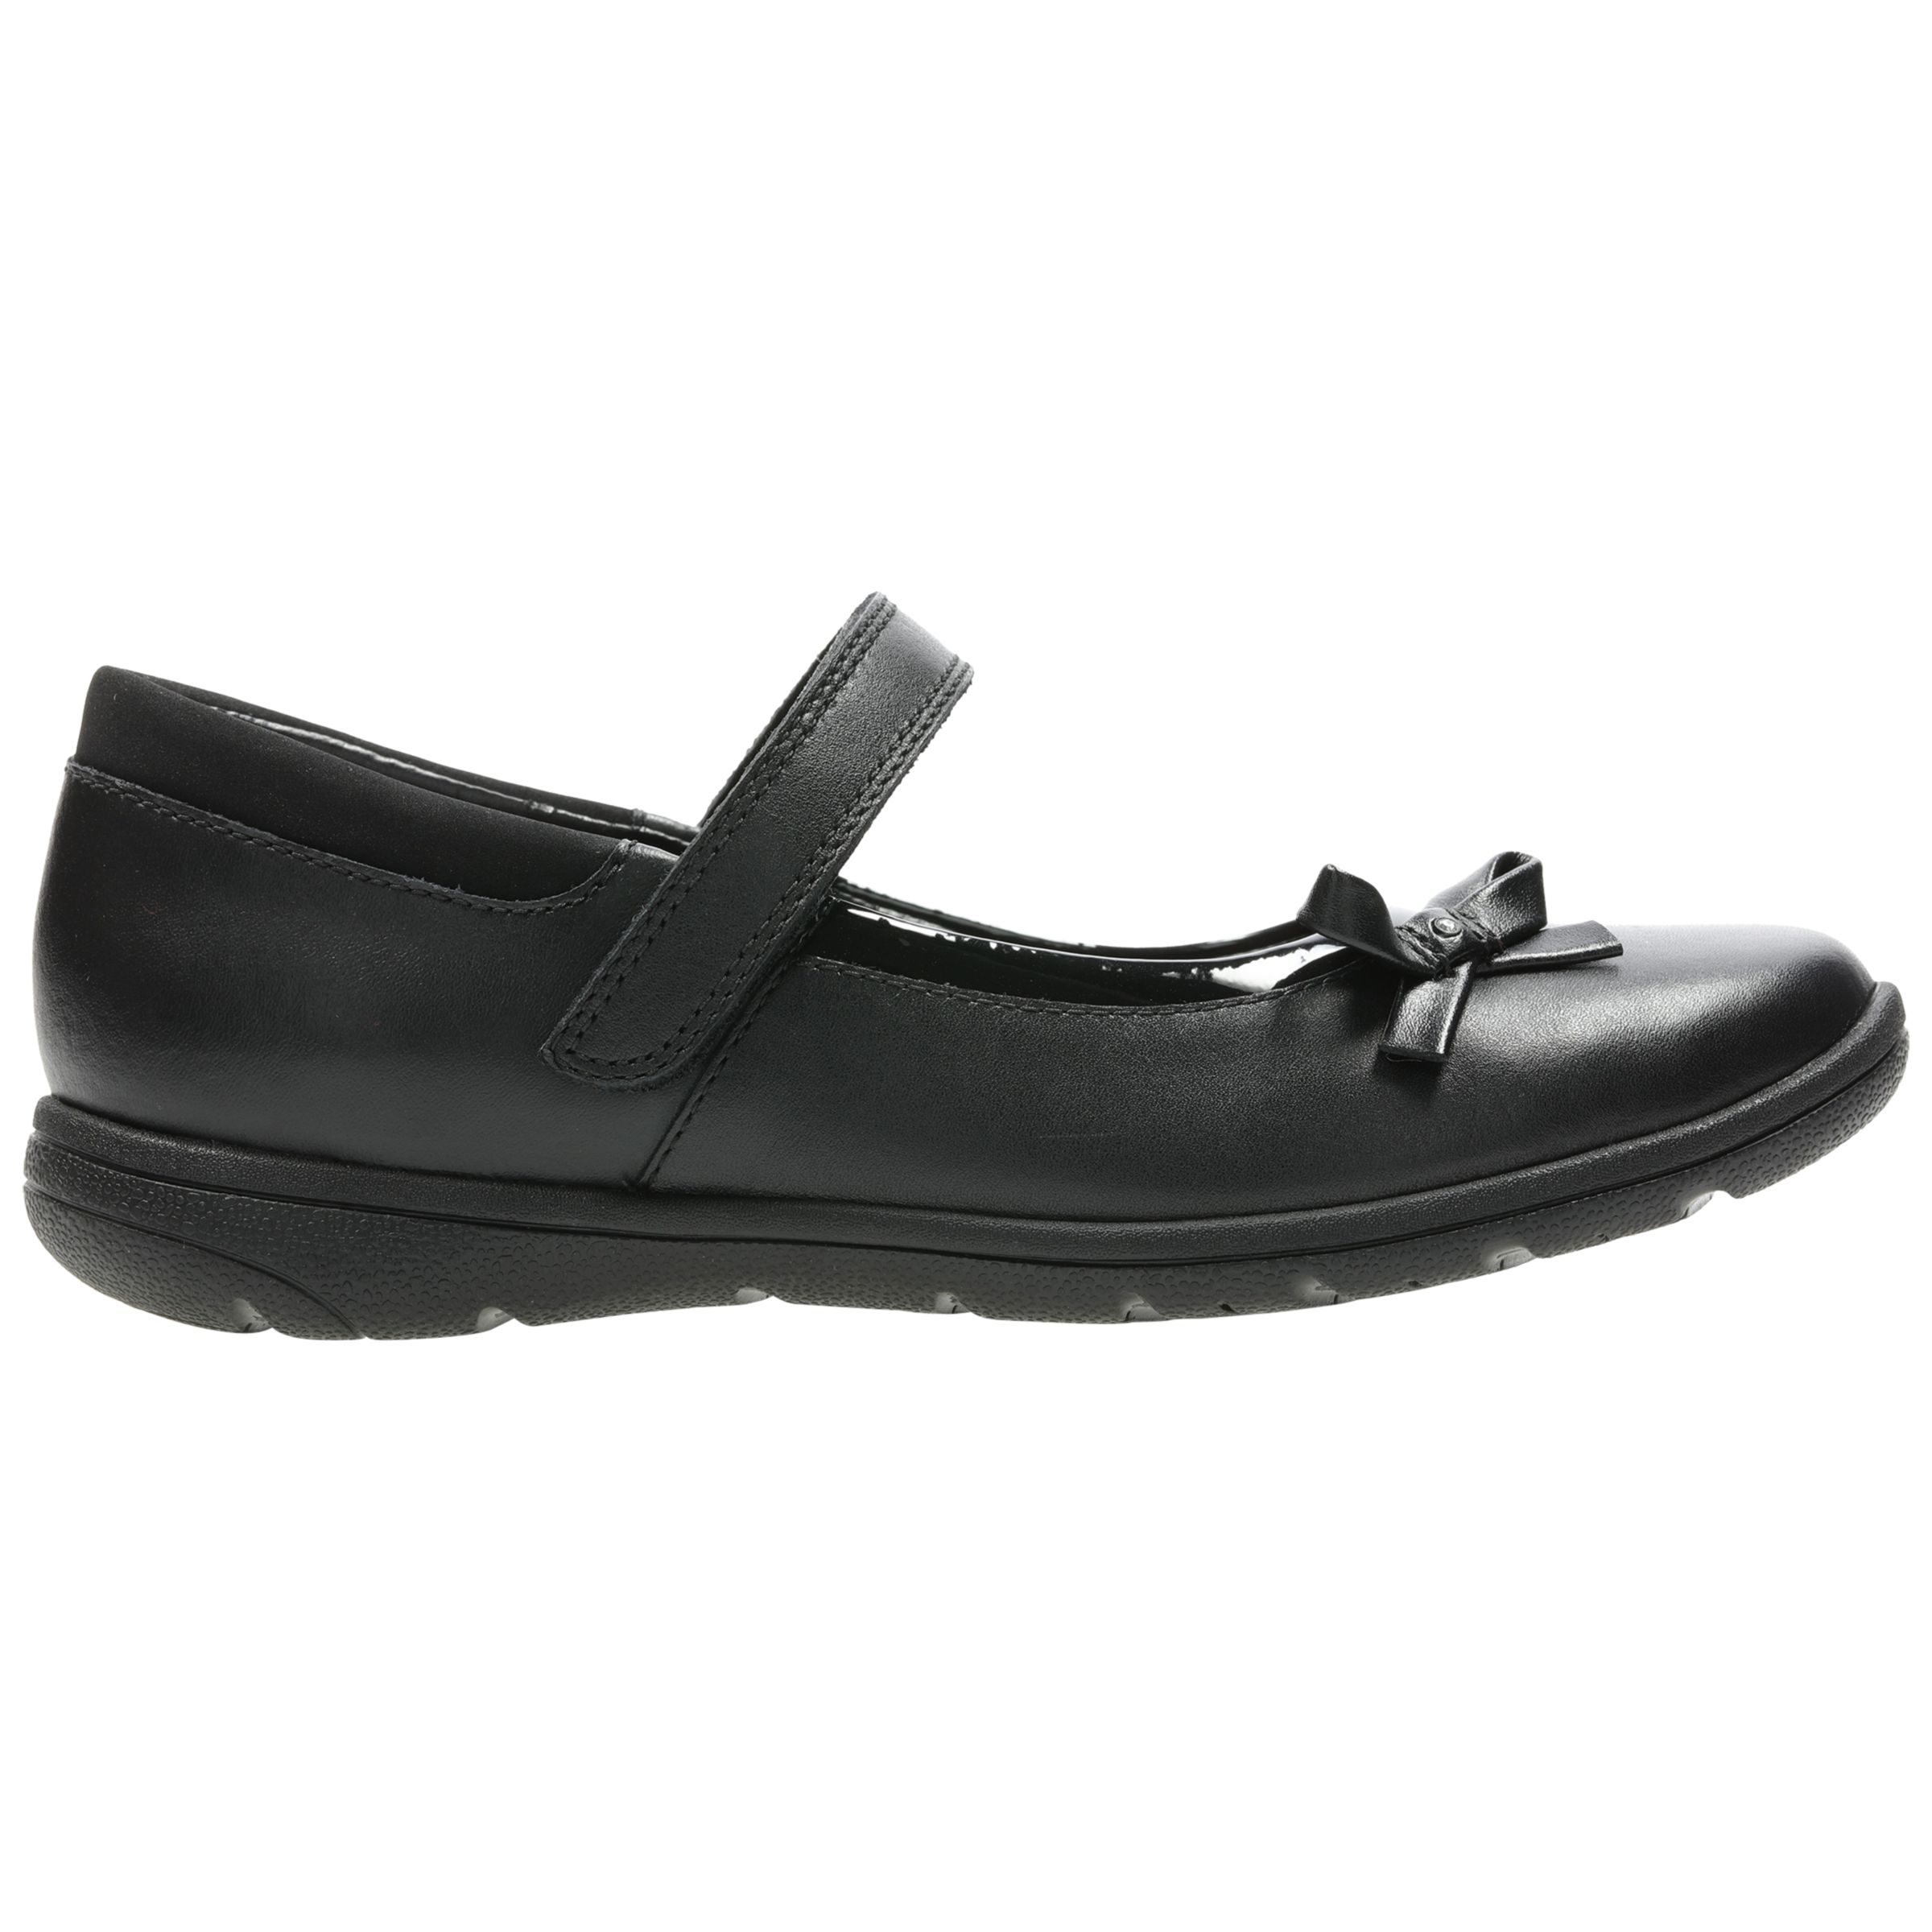 Clarks Children's First Venture Star Leather Shoes, Black